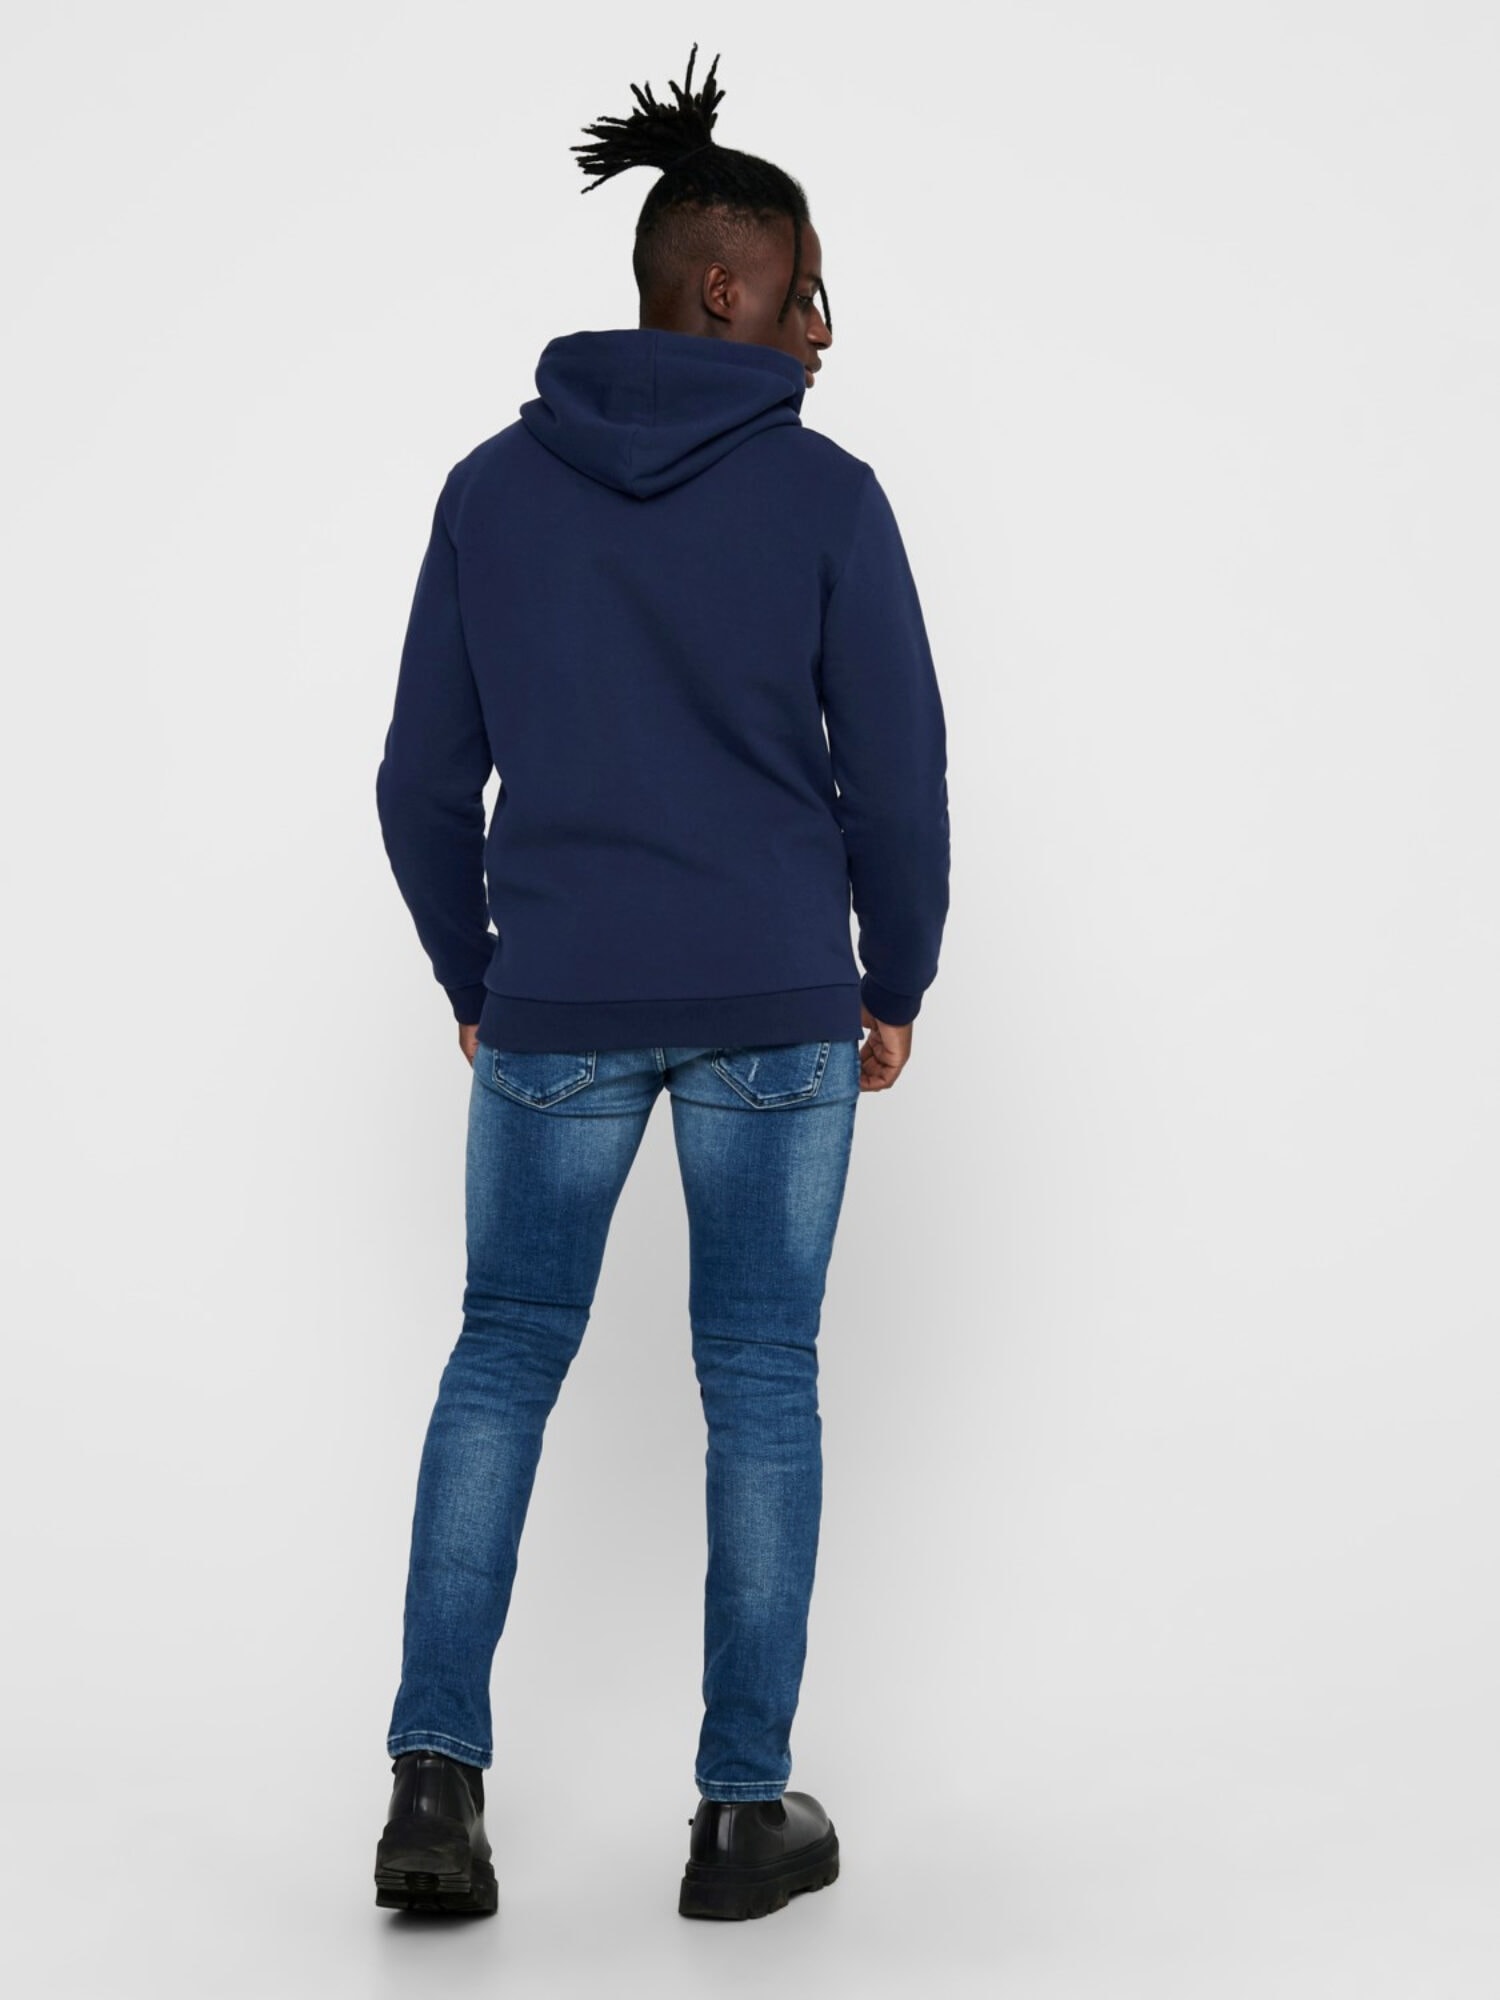 Only & Sons Ceres Life Zip Hoodie Sweat Dress Blues